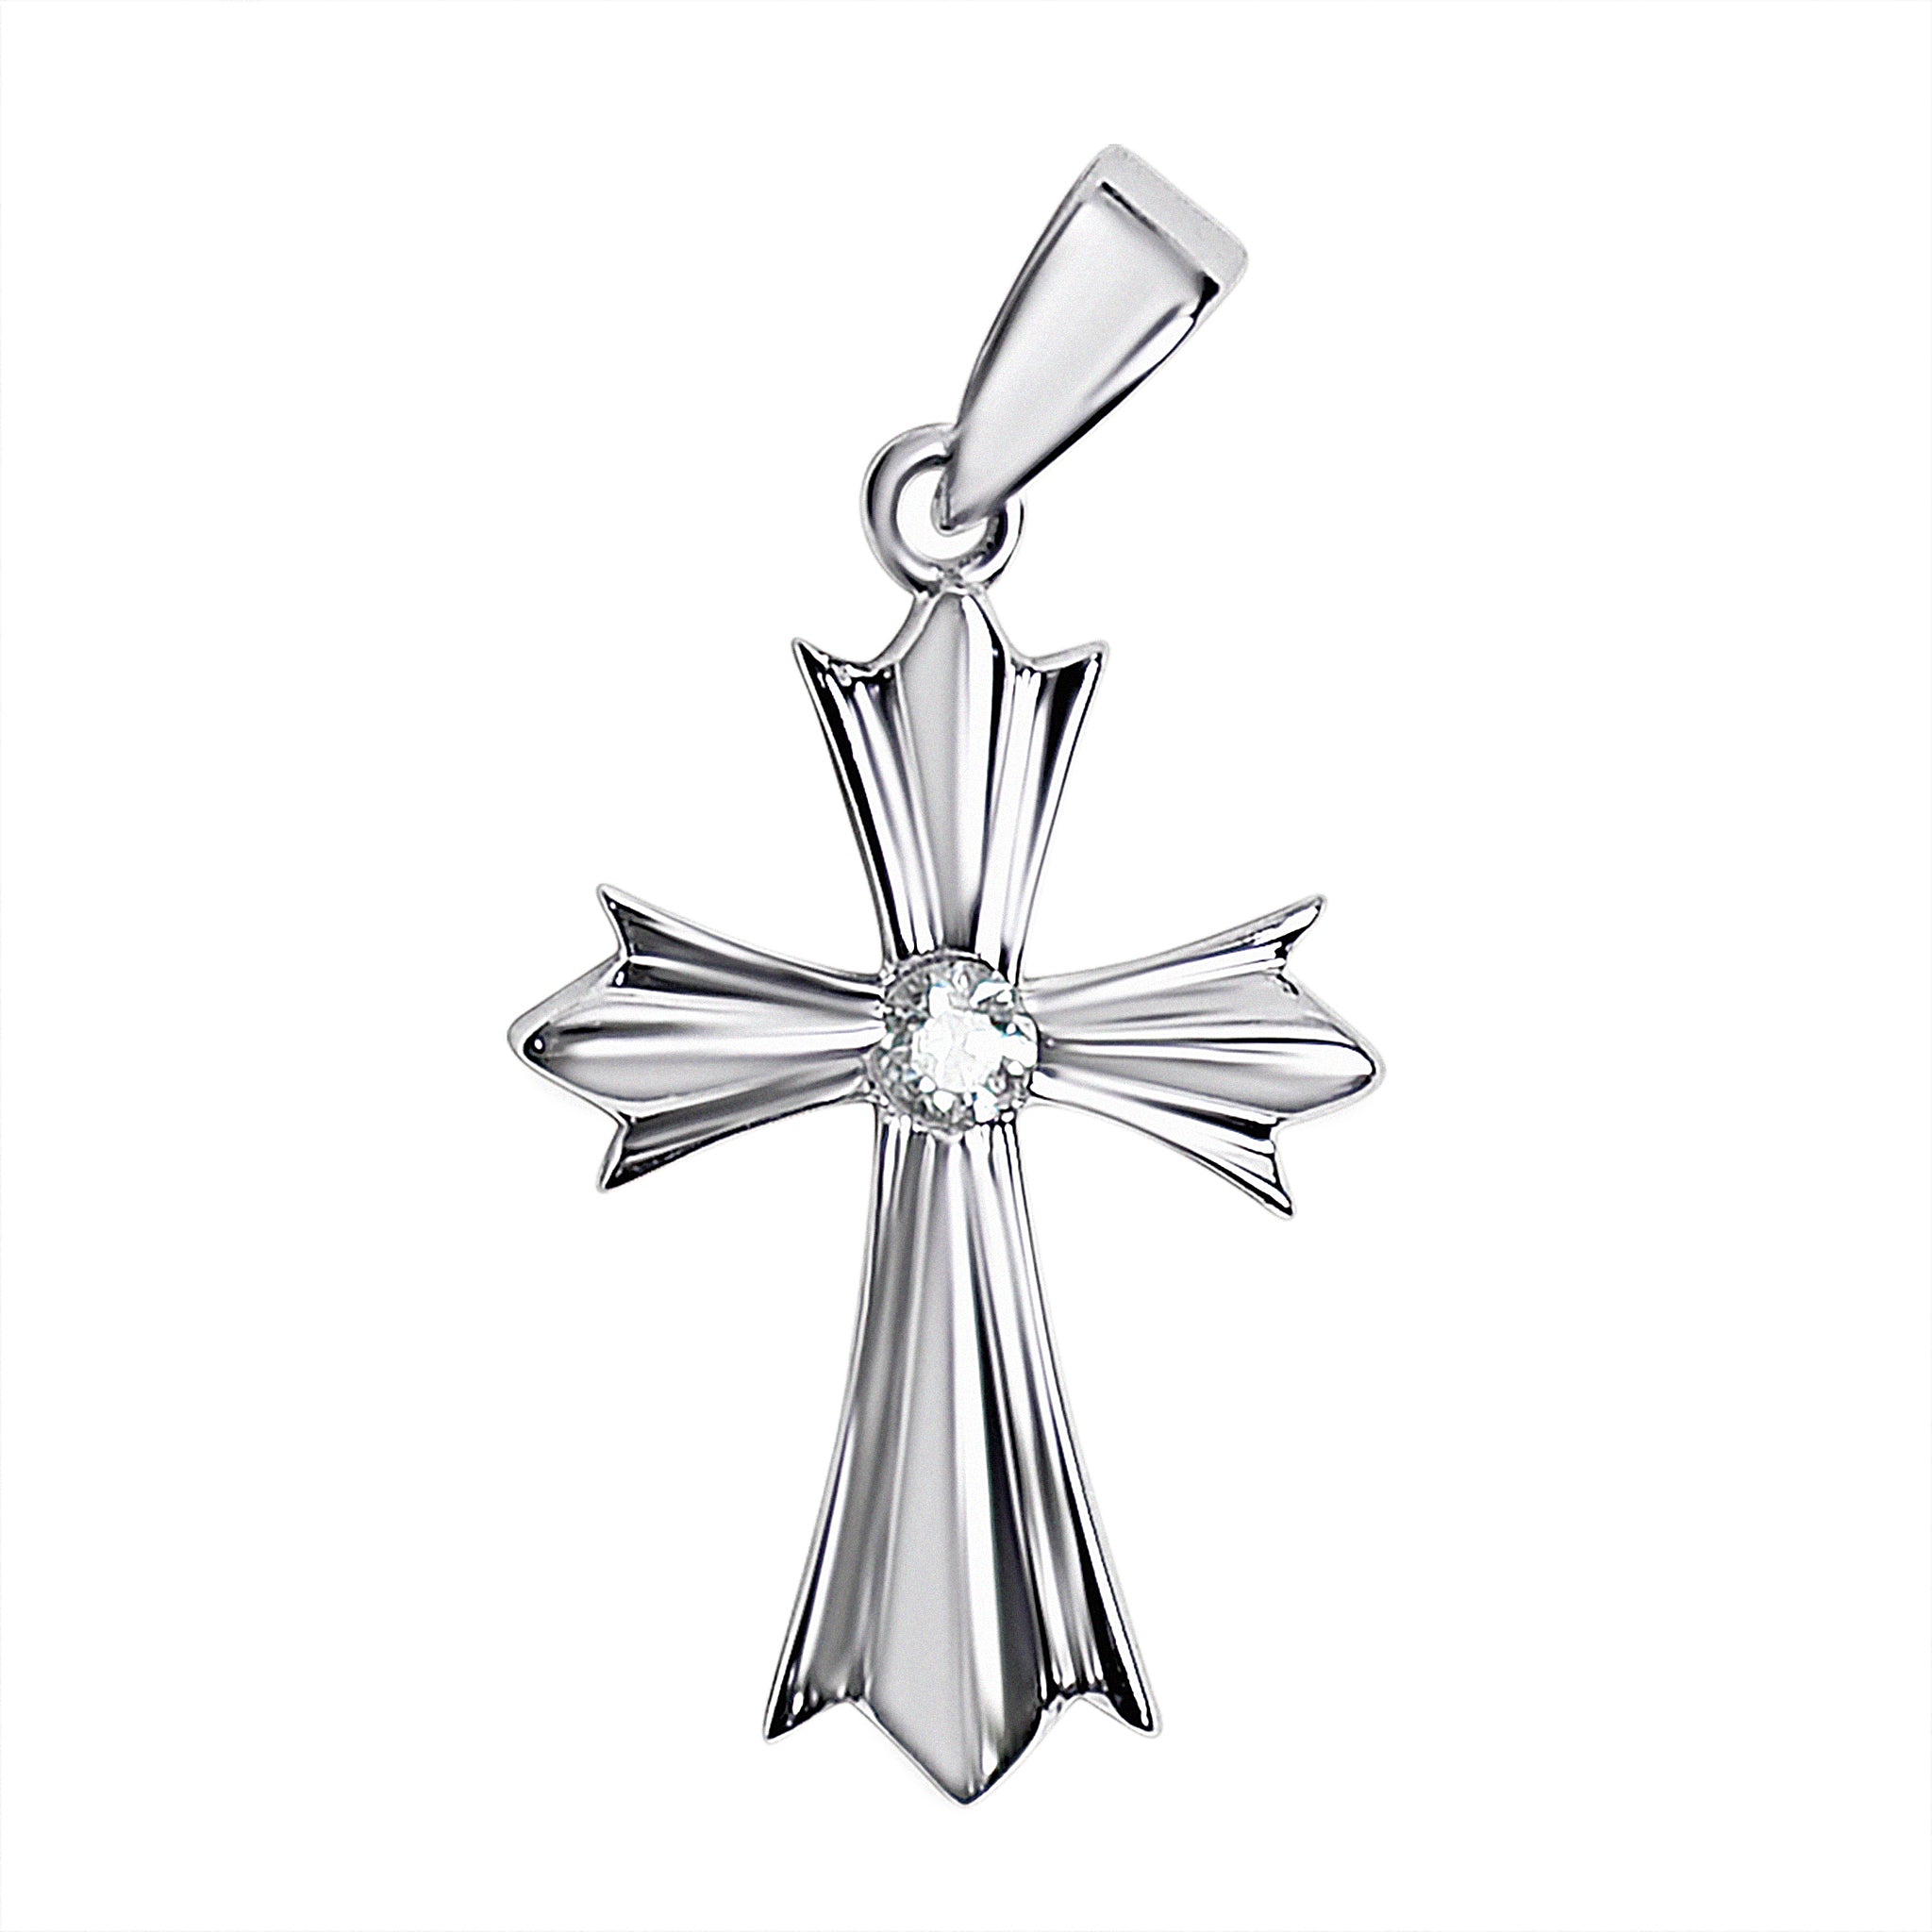 Sterling Silver Cross with CZ Center Pendant / SSP0128-Handmade Silver Necklace- Hypoallergenic Jewelry- Charm Pendent- Handmade Pendant- Gift Pendent